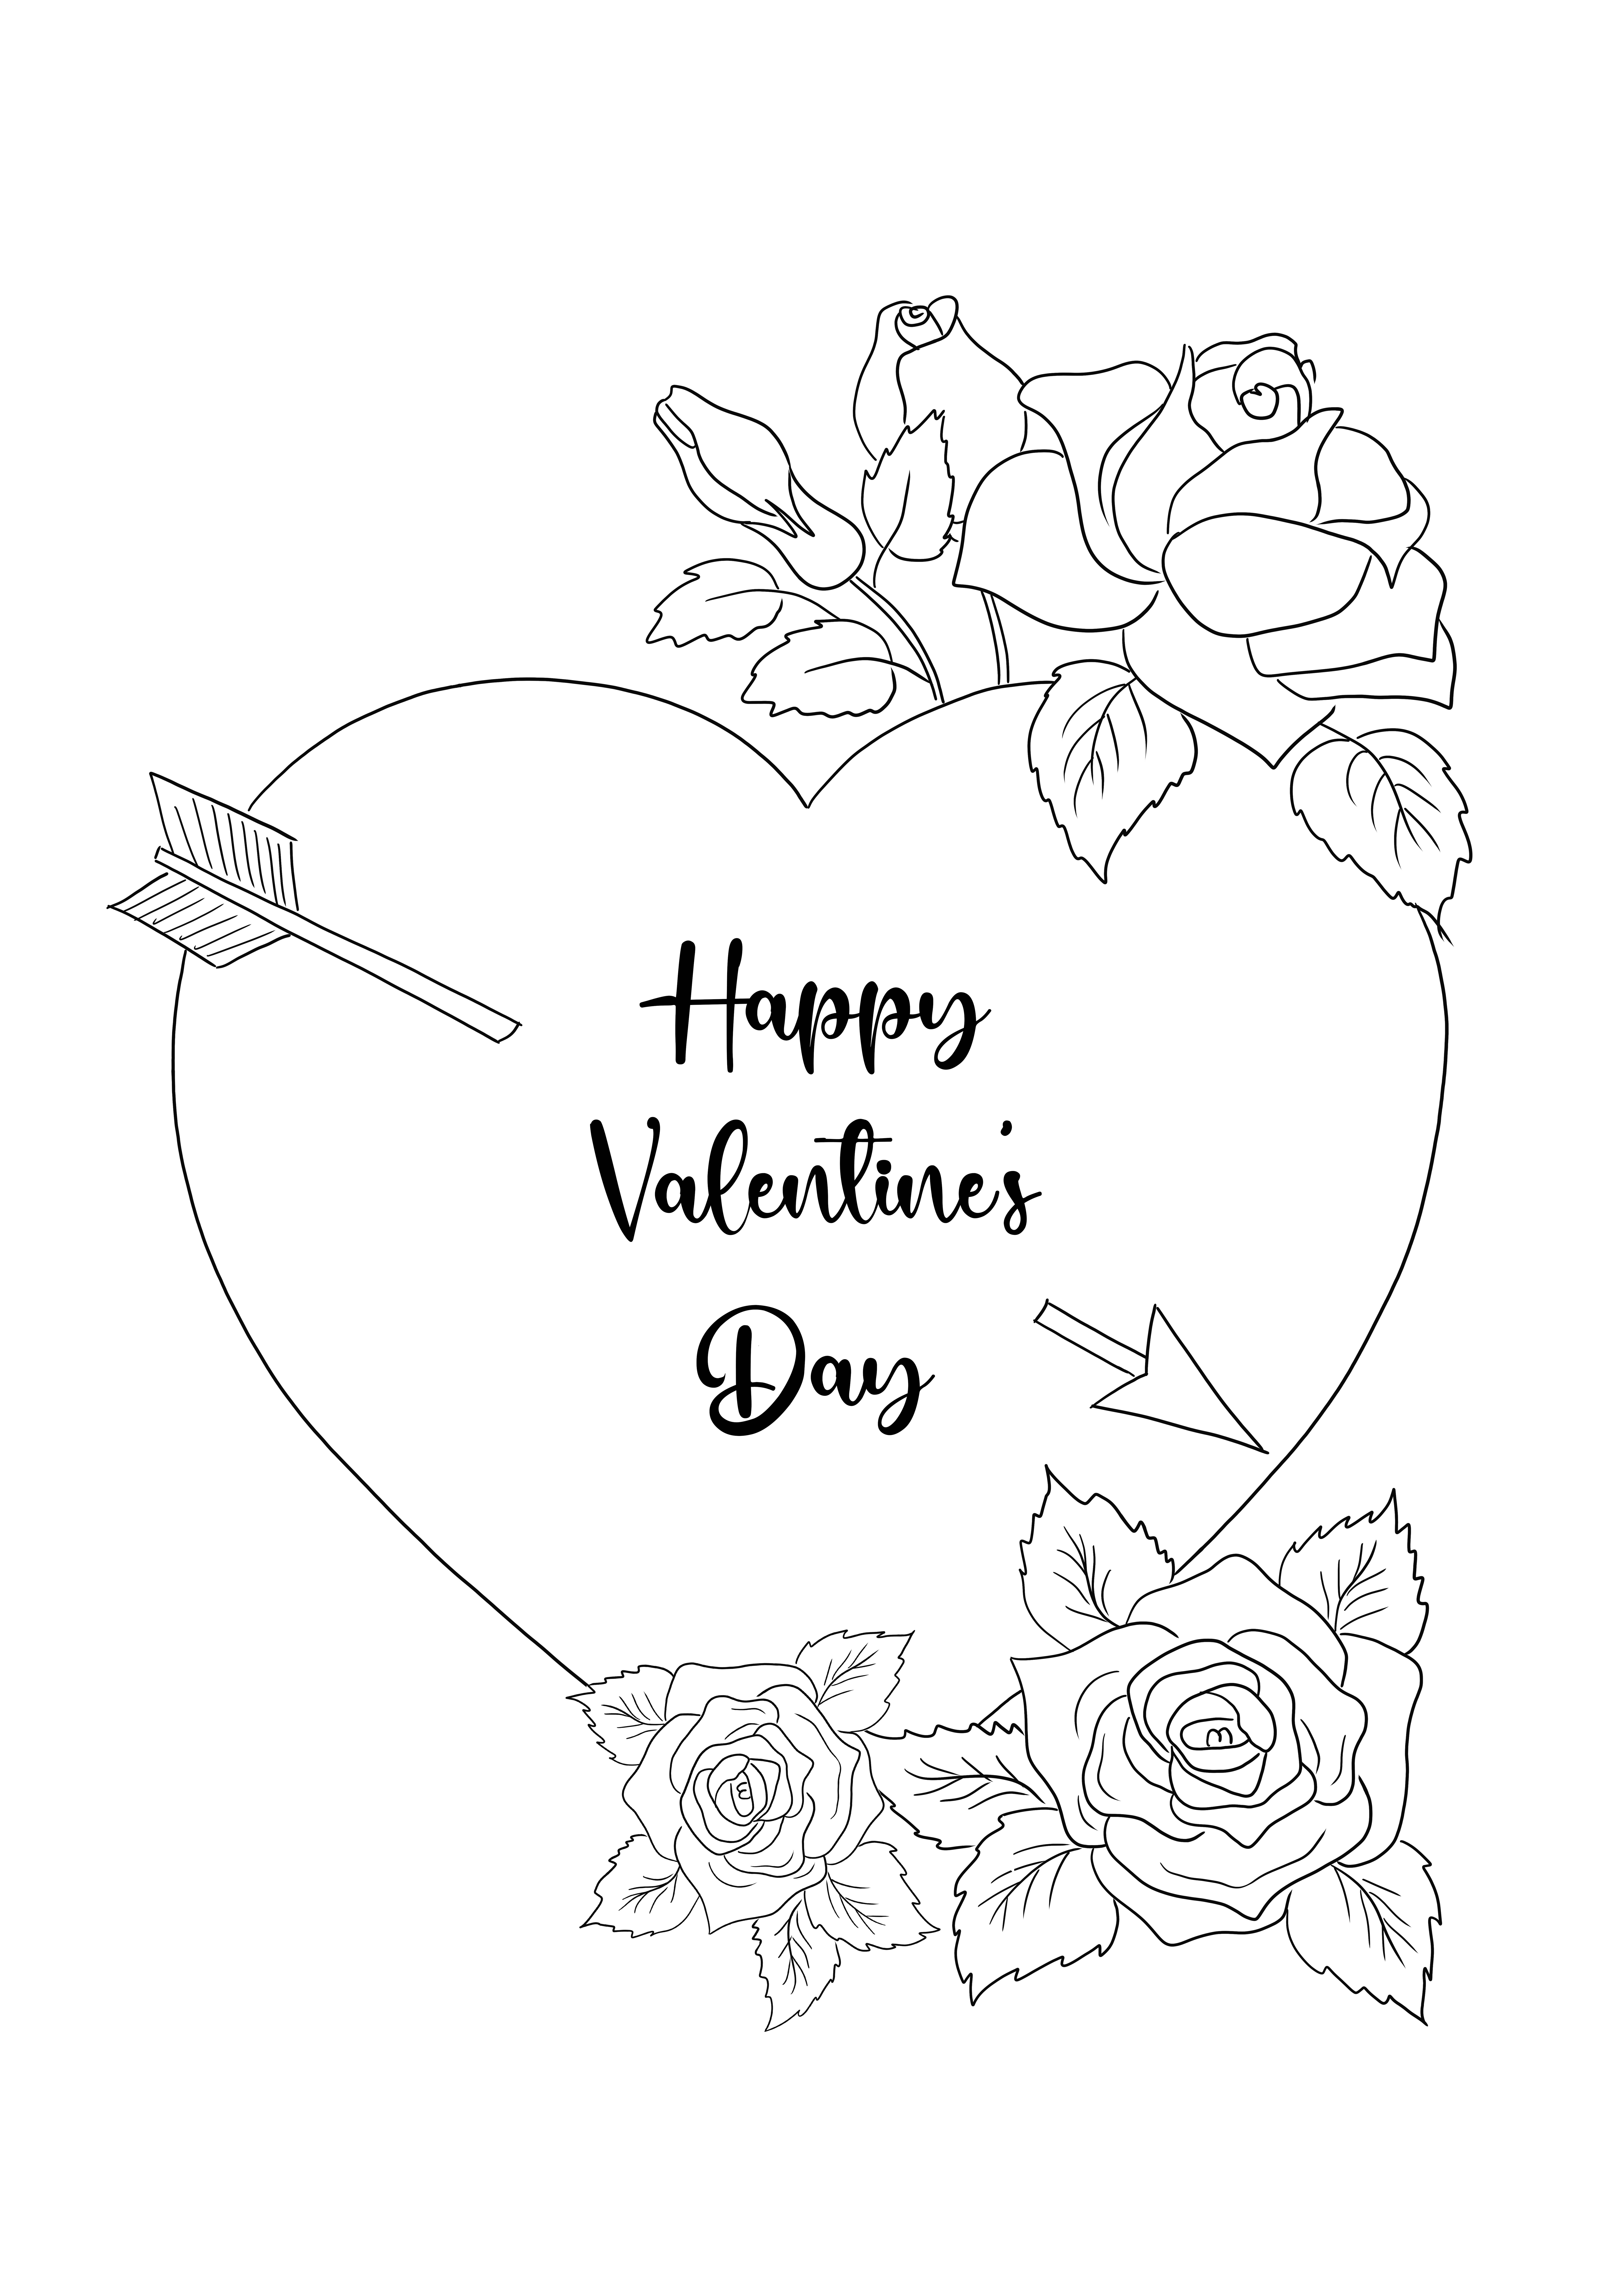 Happy Valentine's Day Card coloring page for all lovers, small or big for free downloading